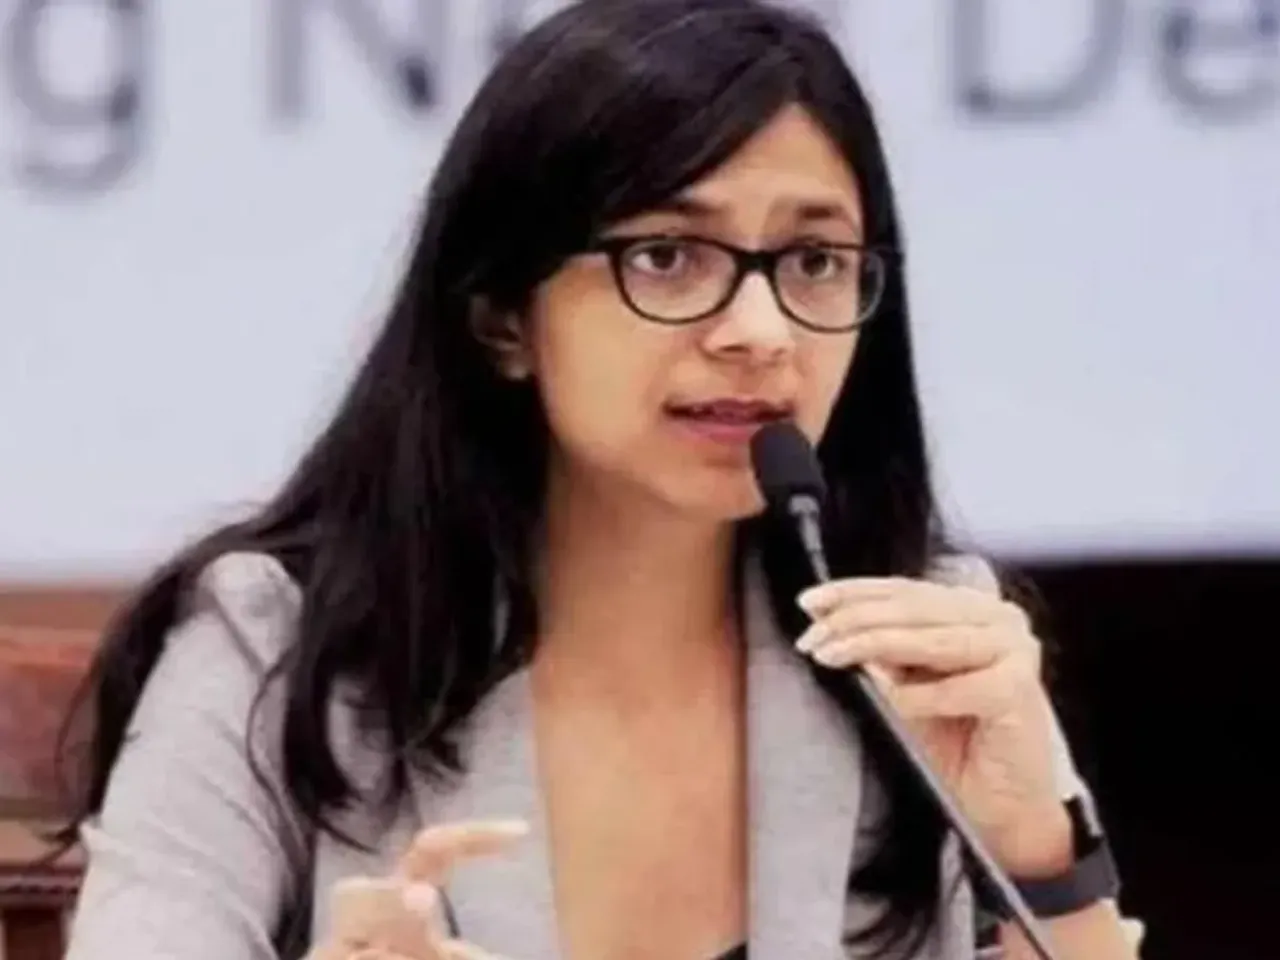 DCW seeks case against man for revealing identity of minor complainant against Brij Bhushan Singh